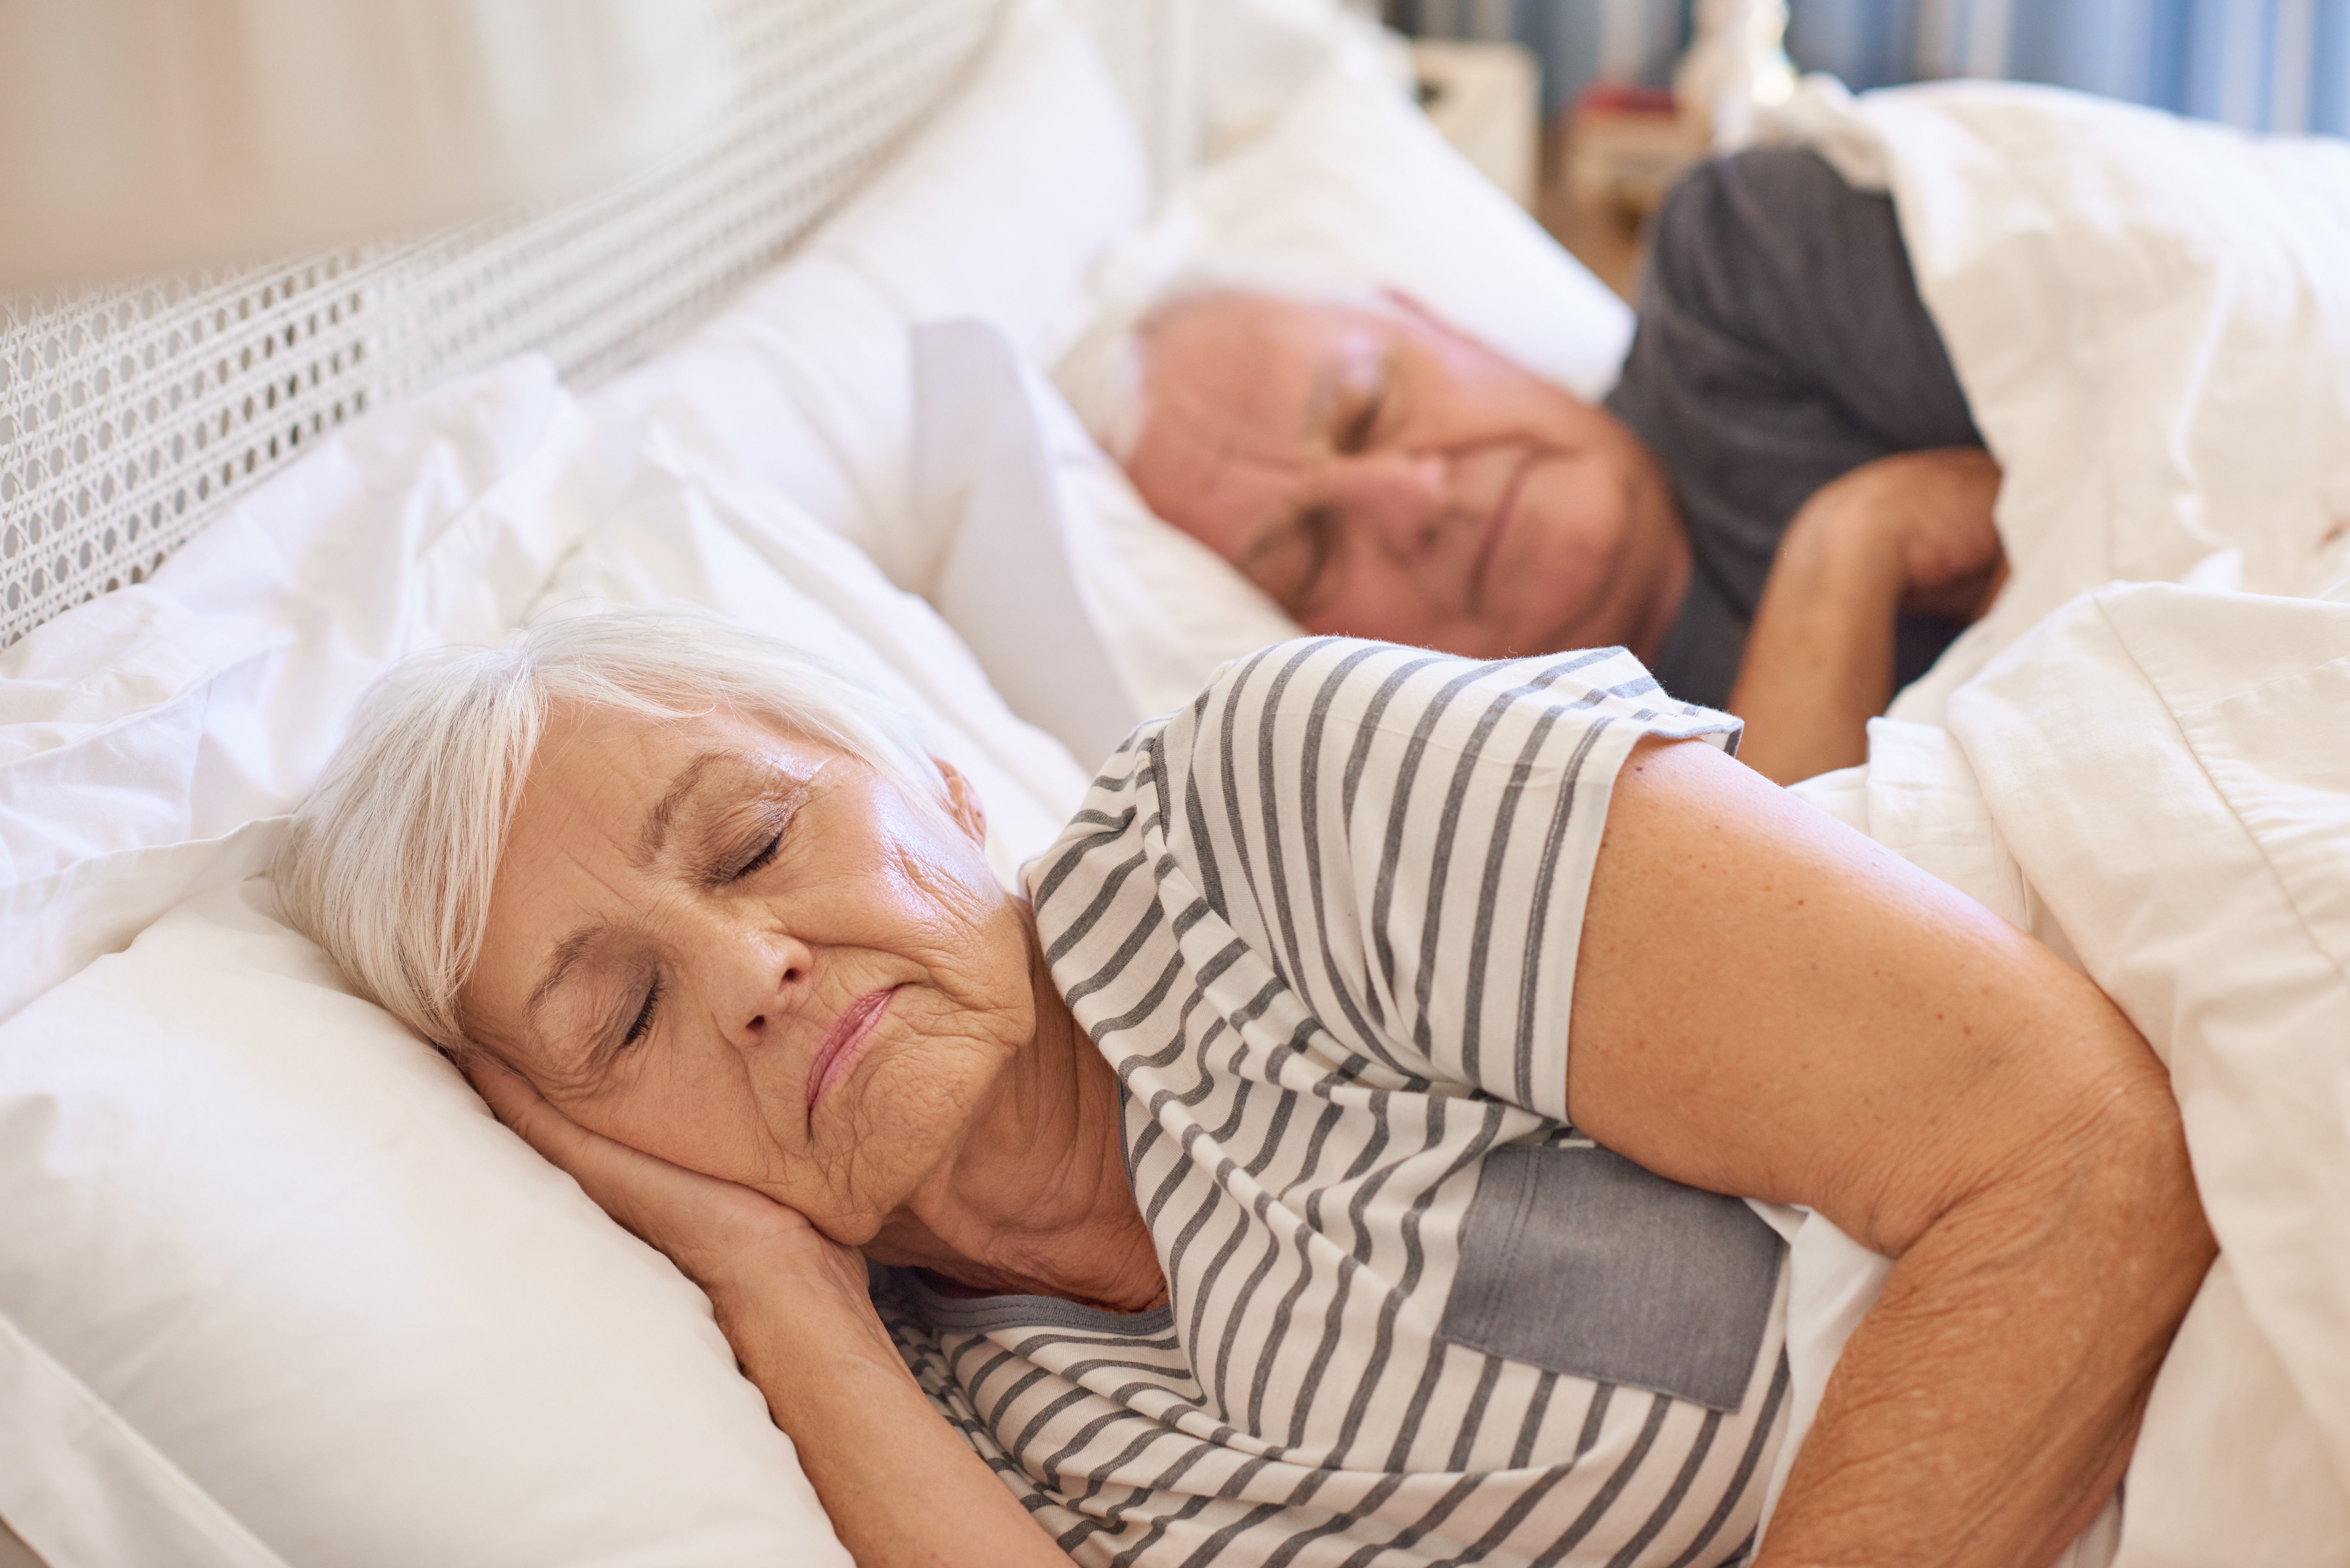 Sleeping pills and older people: the risks - NPS MedicineWise